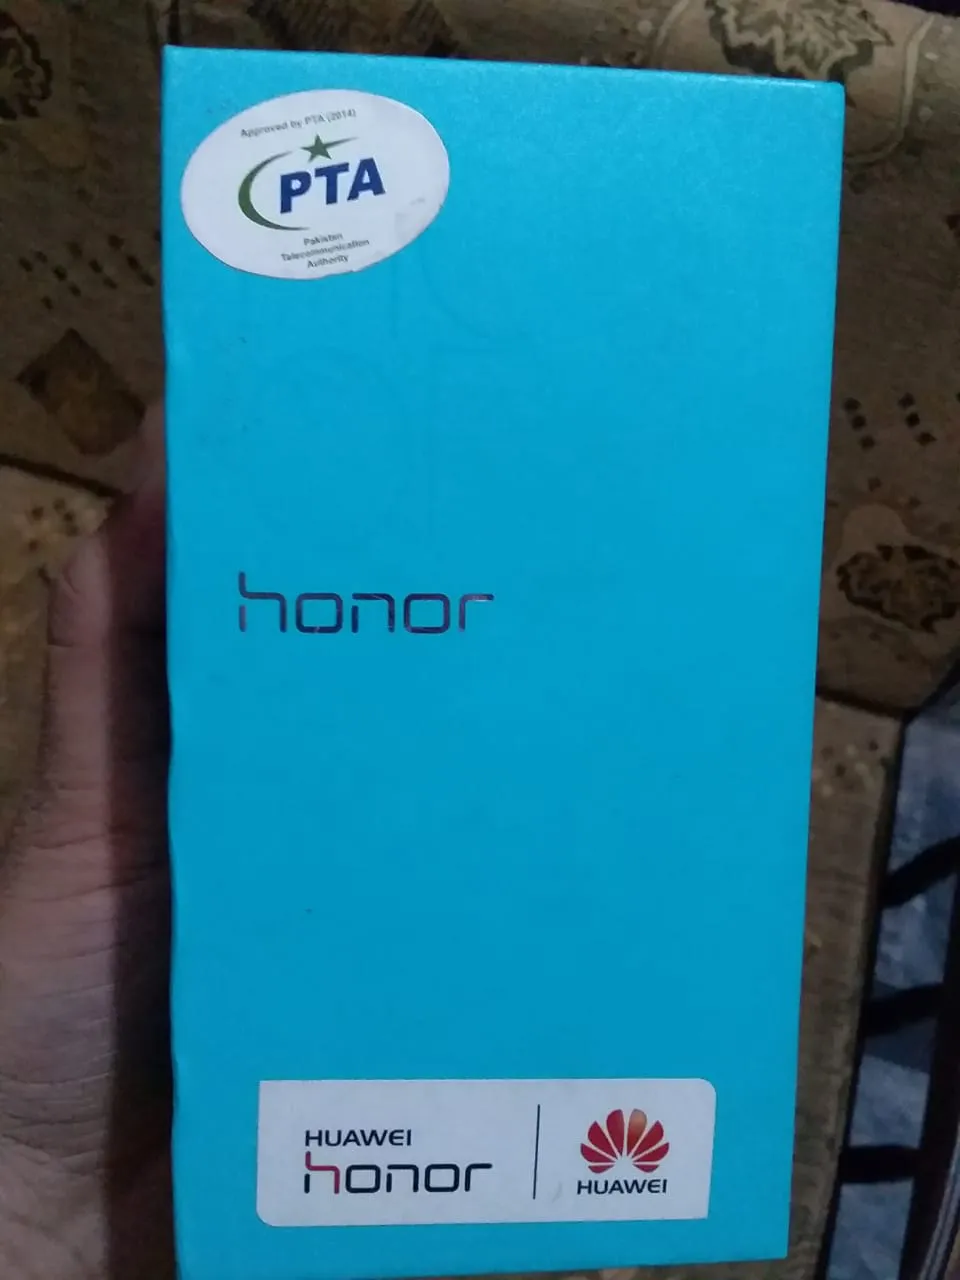 Huawei Honor 4c For Sale - photo 1